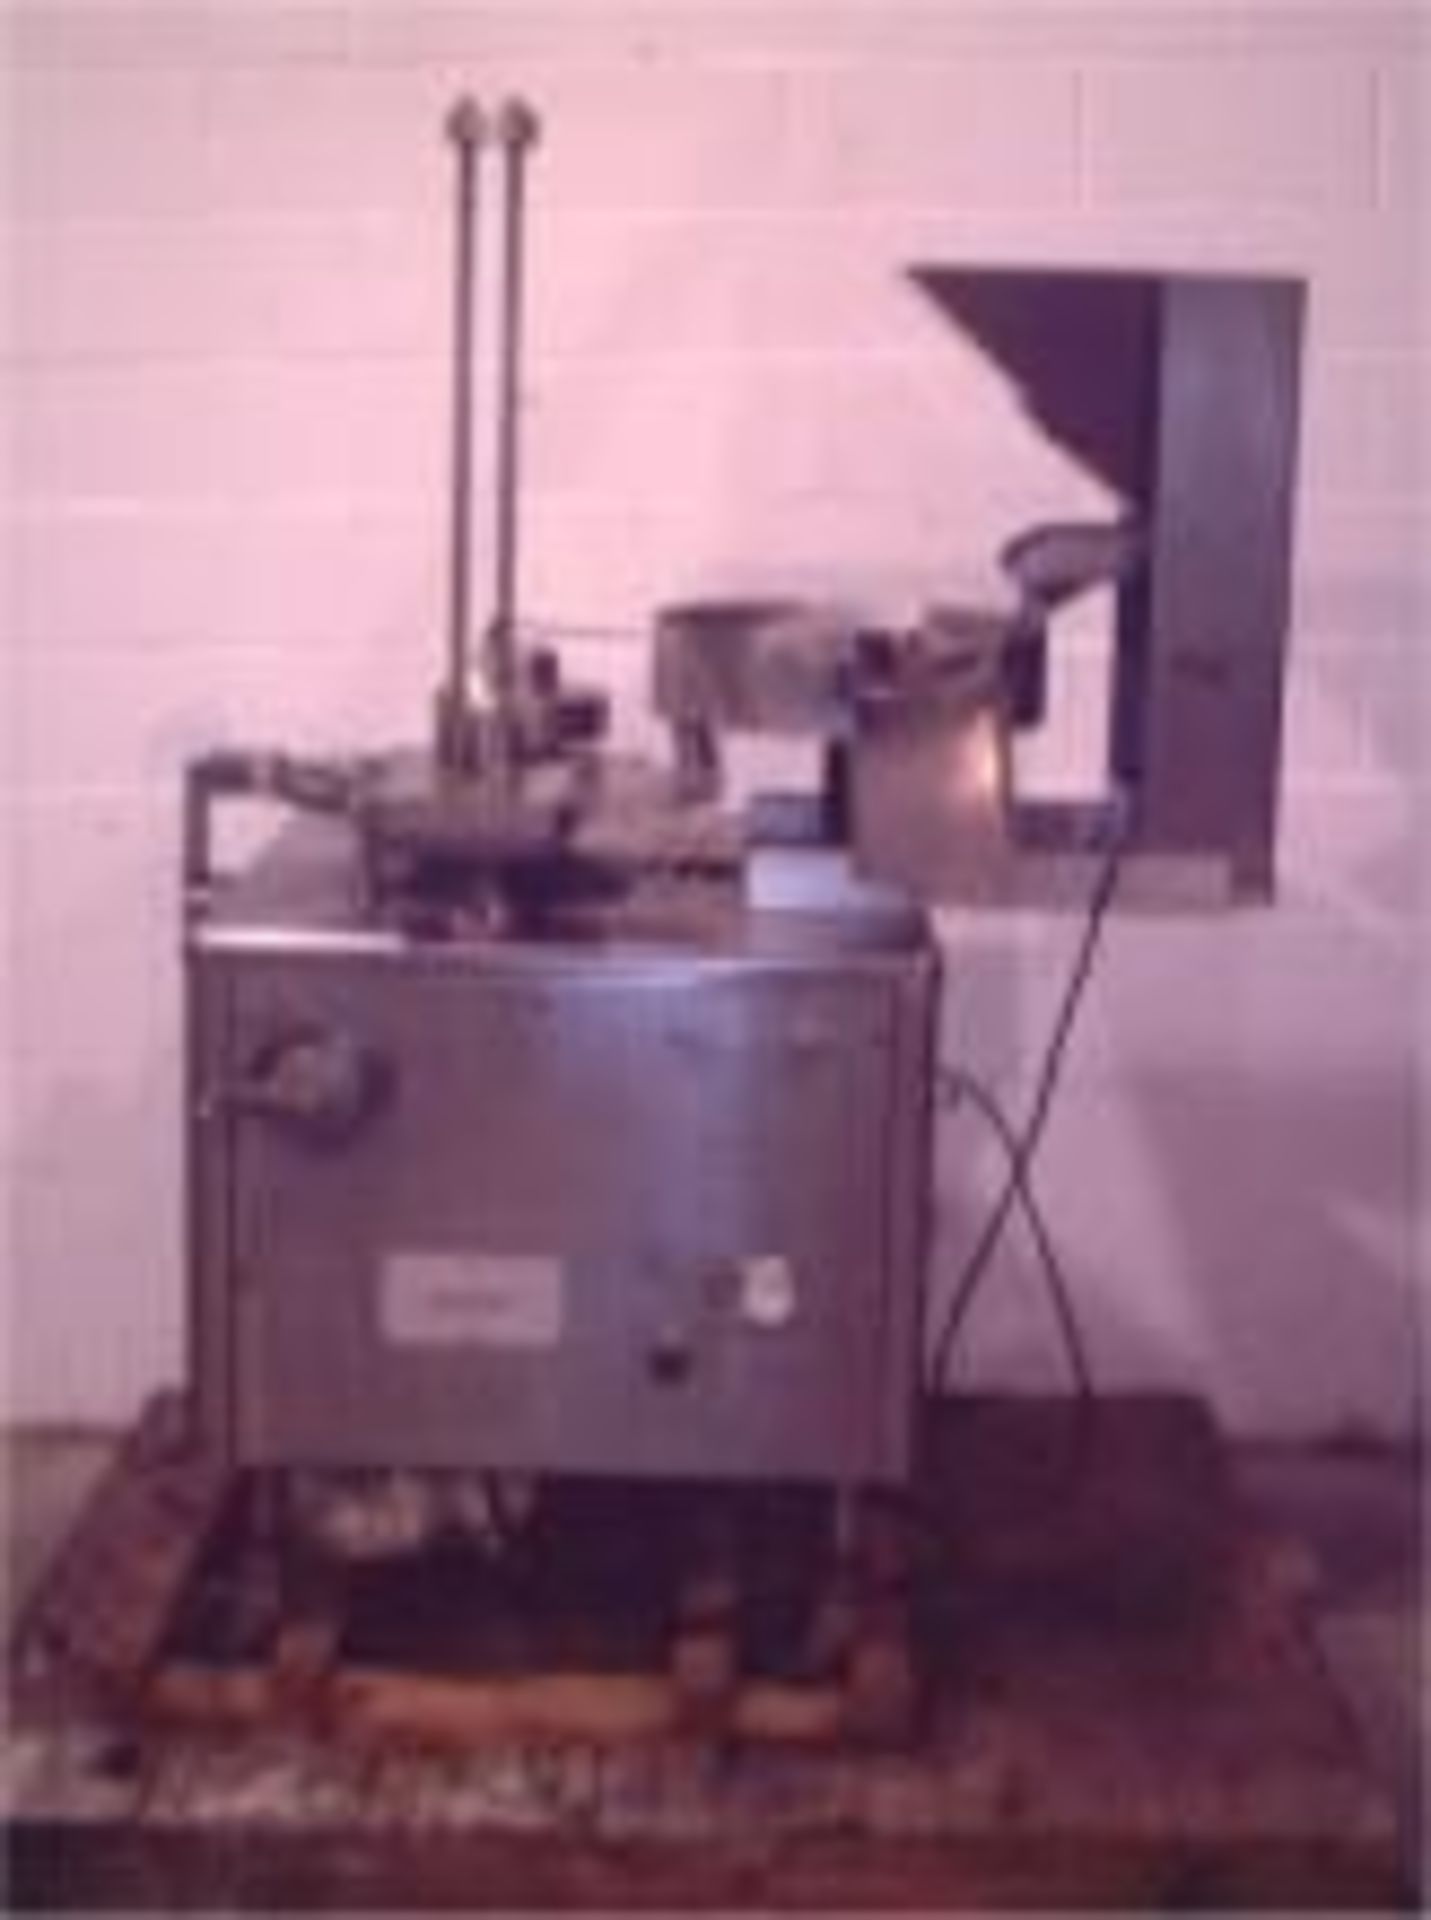 Rebuilt Custom Made Cup Filler for Gumballs or Individual Solid Products.  Comes with a 3Ph/60Hz/